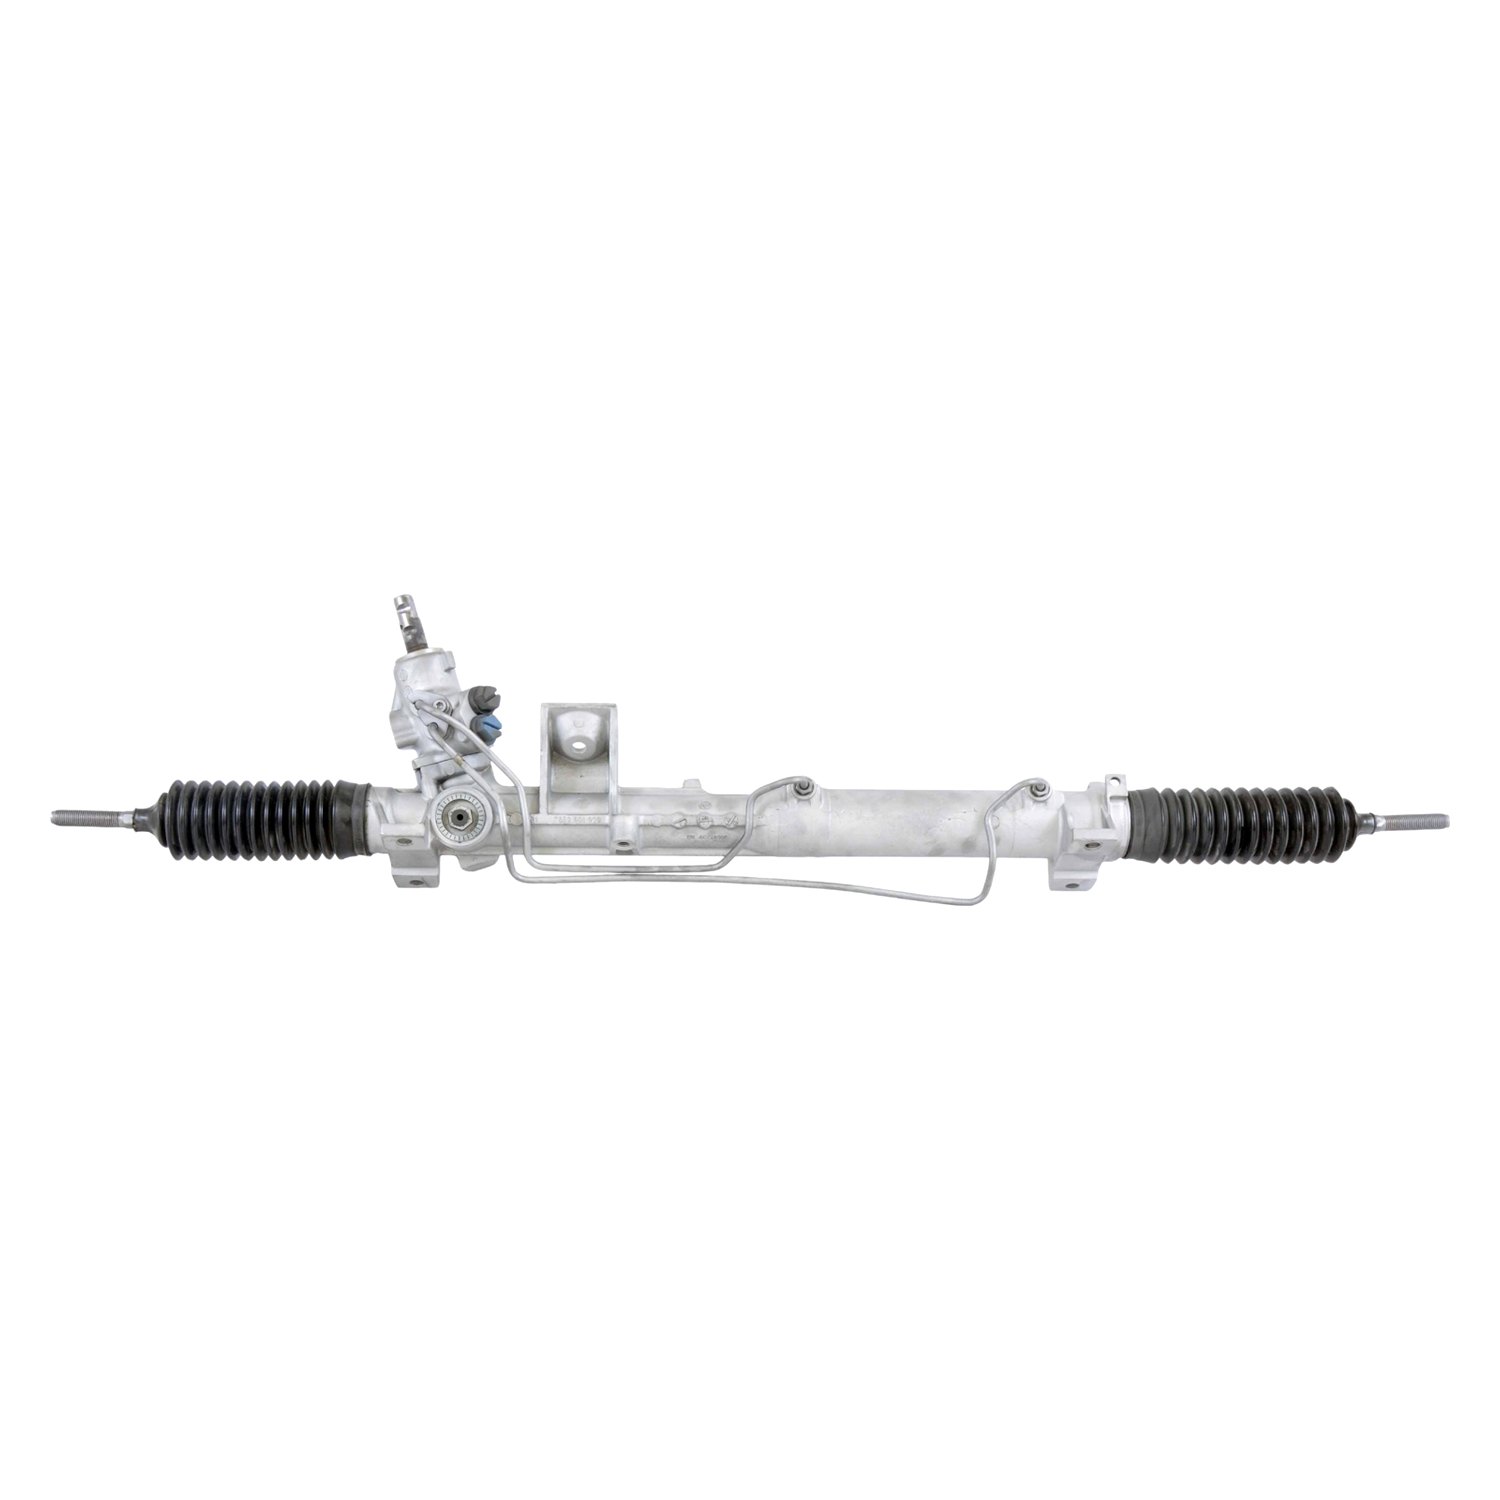 Remanufactured ACDelco 36R0855 Professional Rack and Pinion Power Steering Gear Assembly